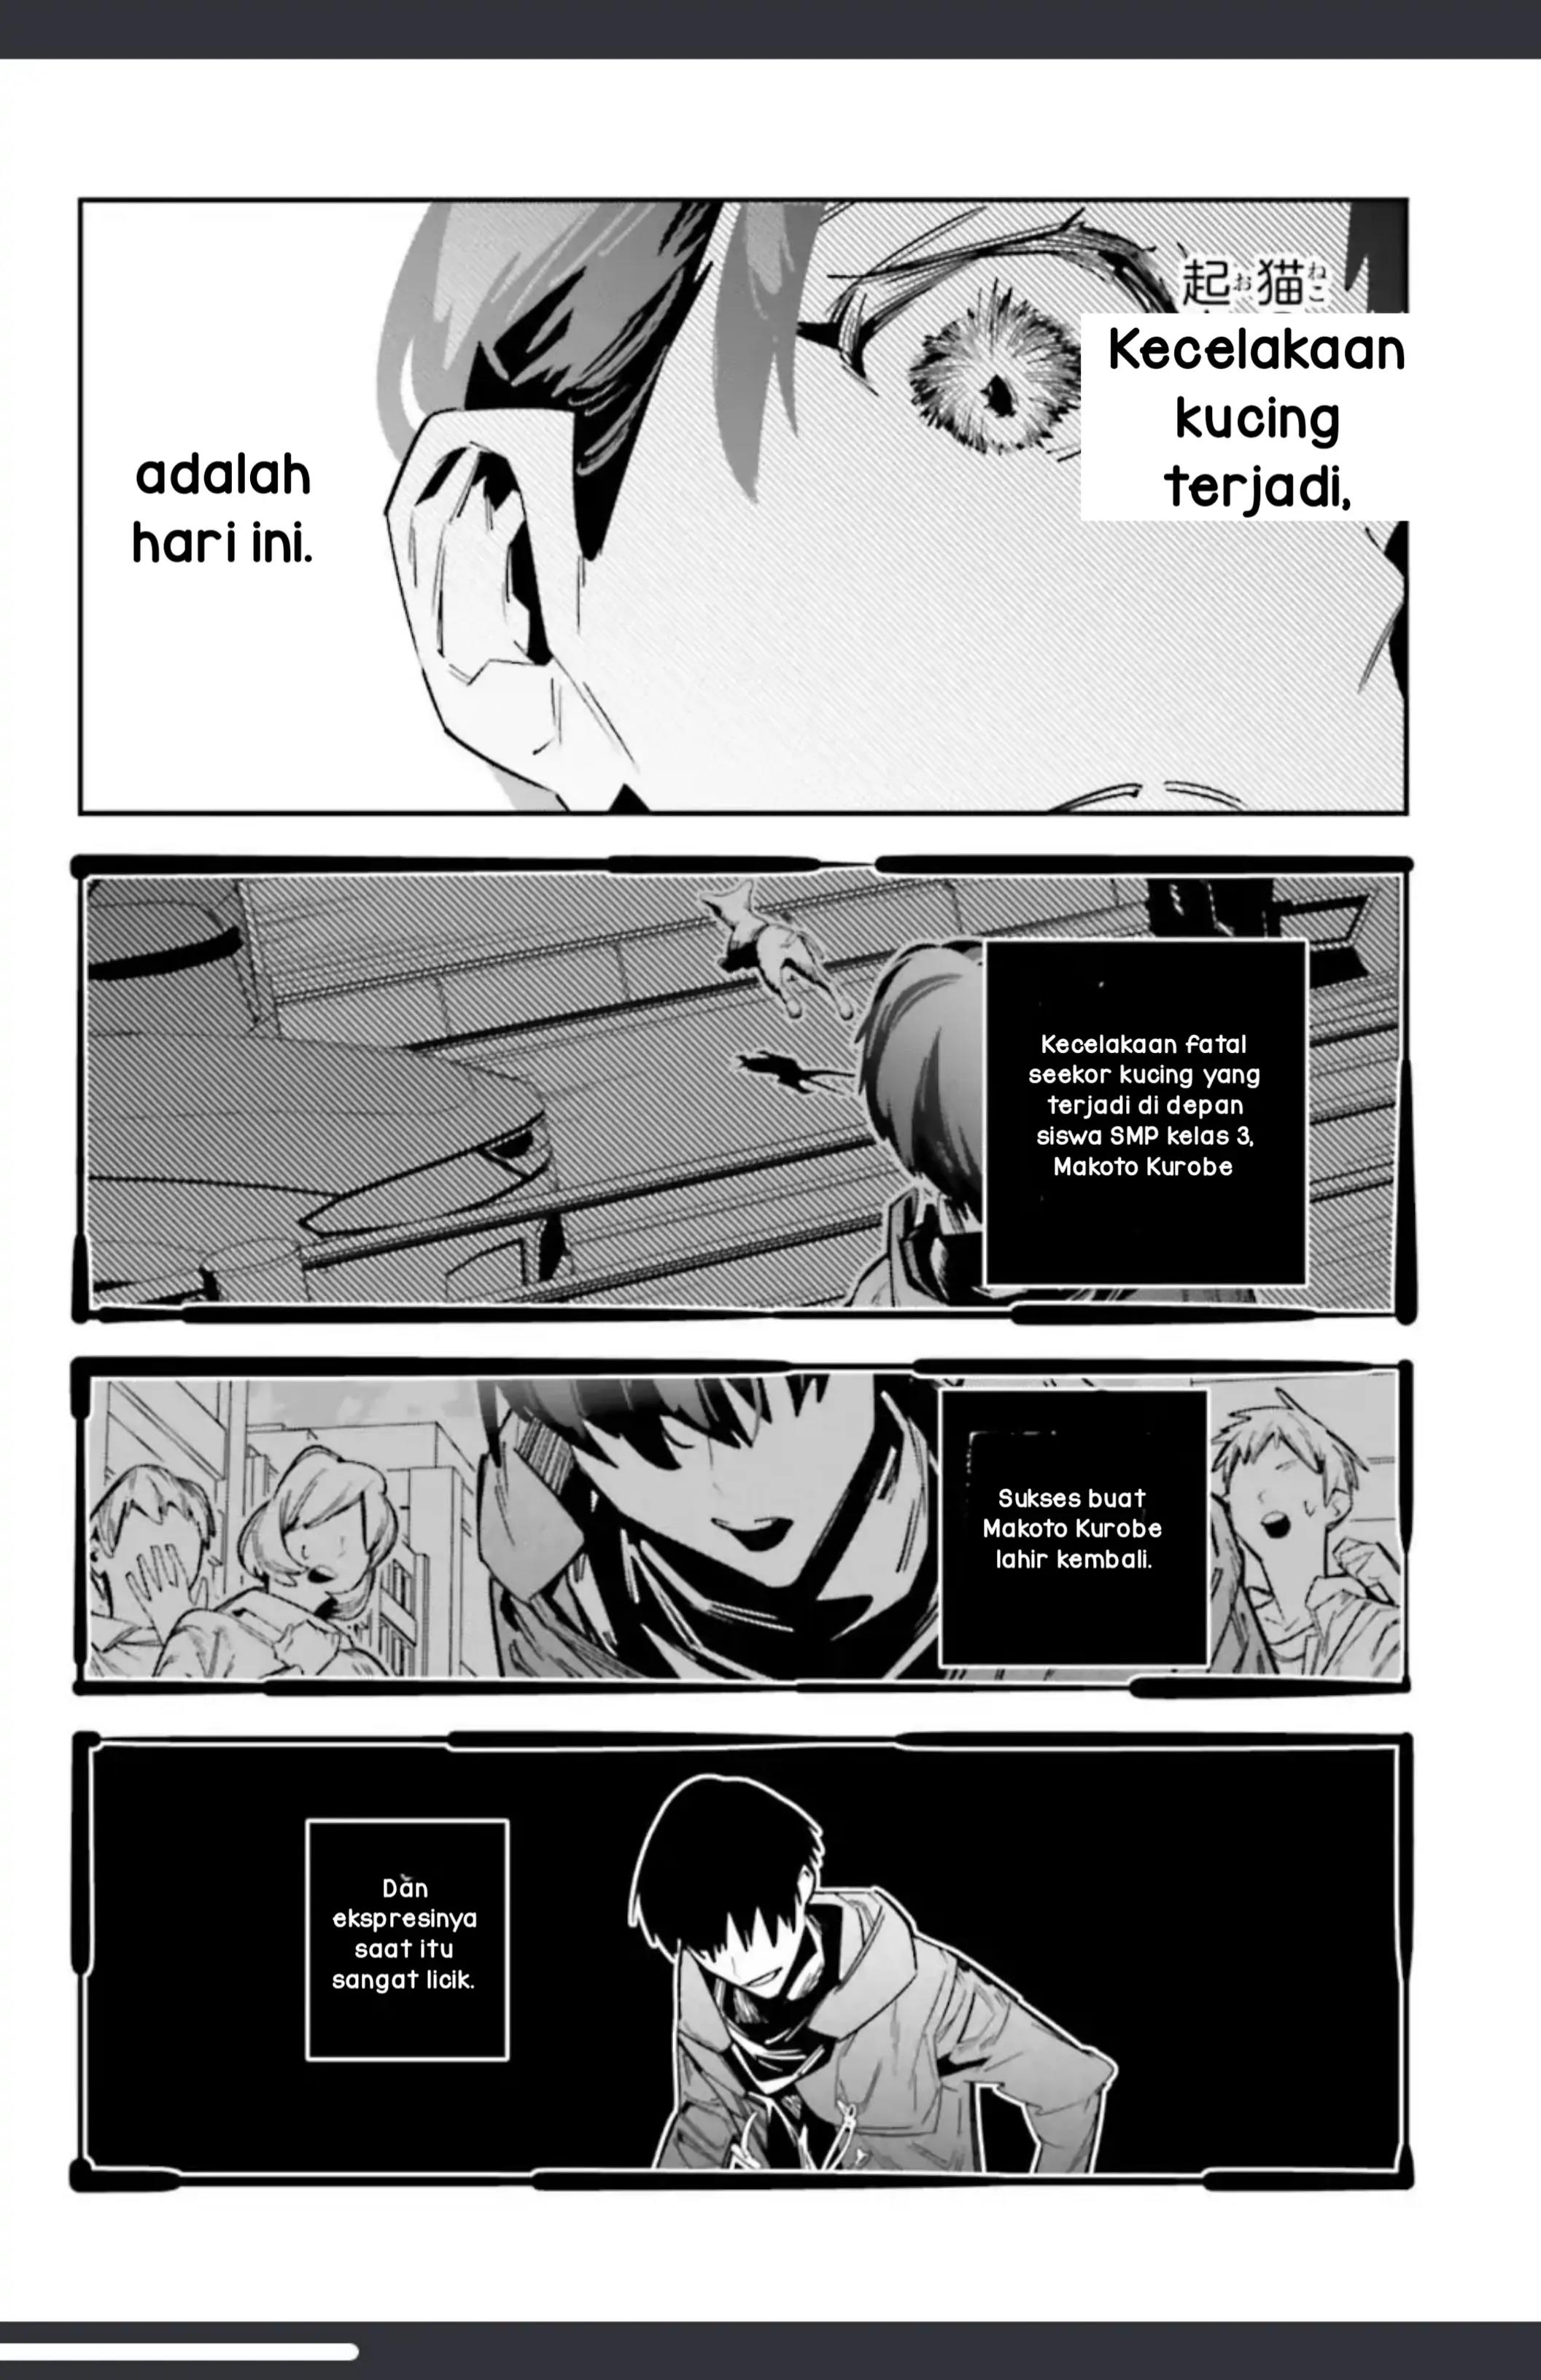 I Reincarnated as the Little Sister of a Death Game Manga’s Murder Mastermind and Failed Chapter 4.1